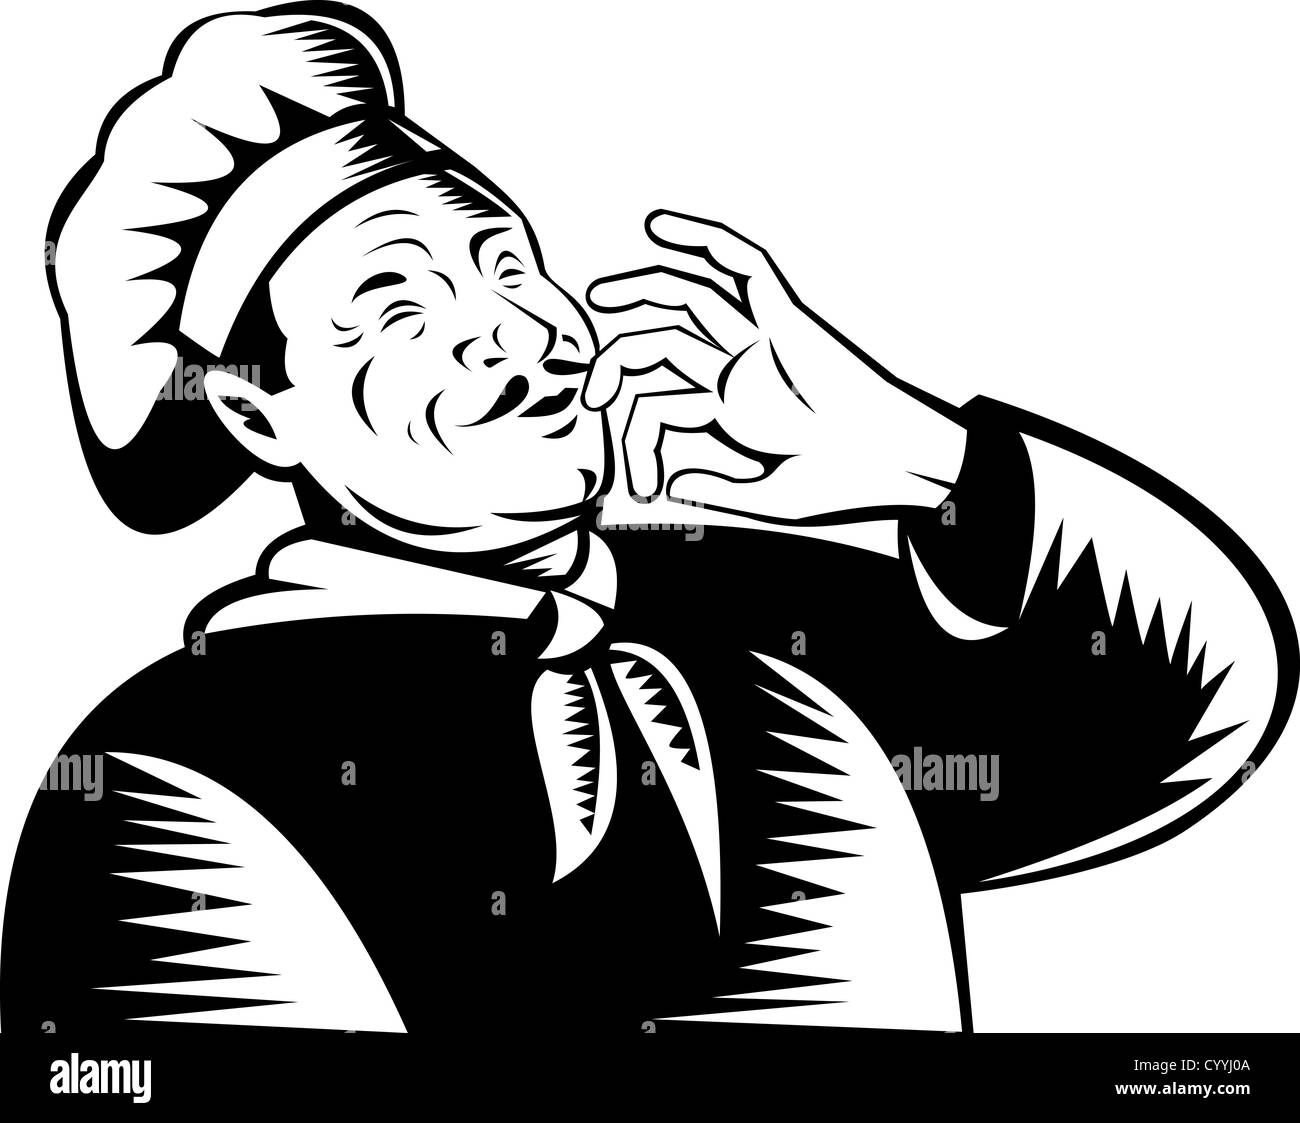 illustration of a chef, cook or baker done in retro woodcut style holding hand to mouth blowing a kiss Stock Photo